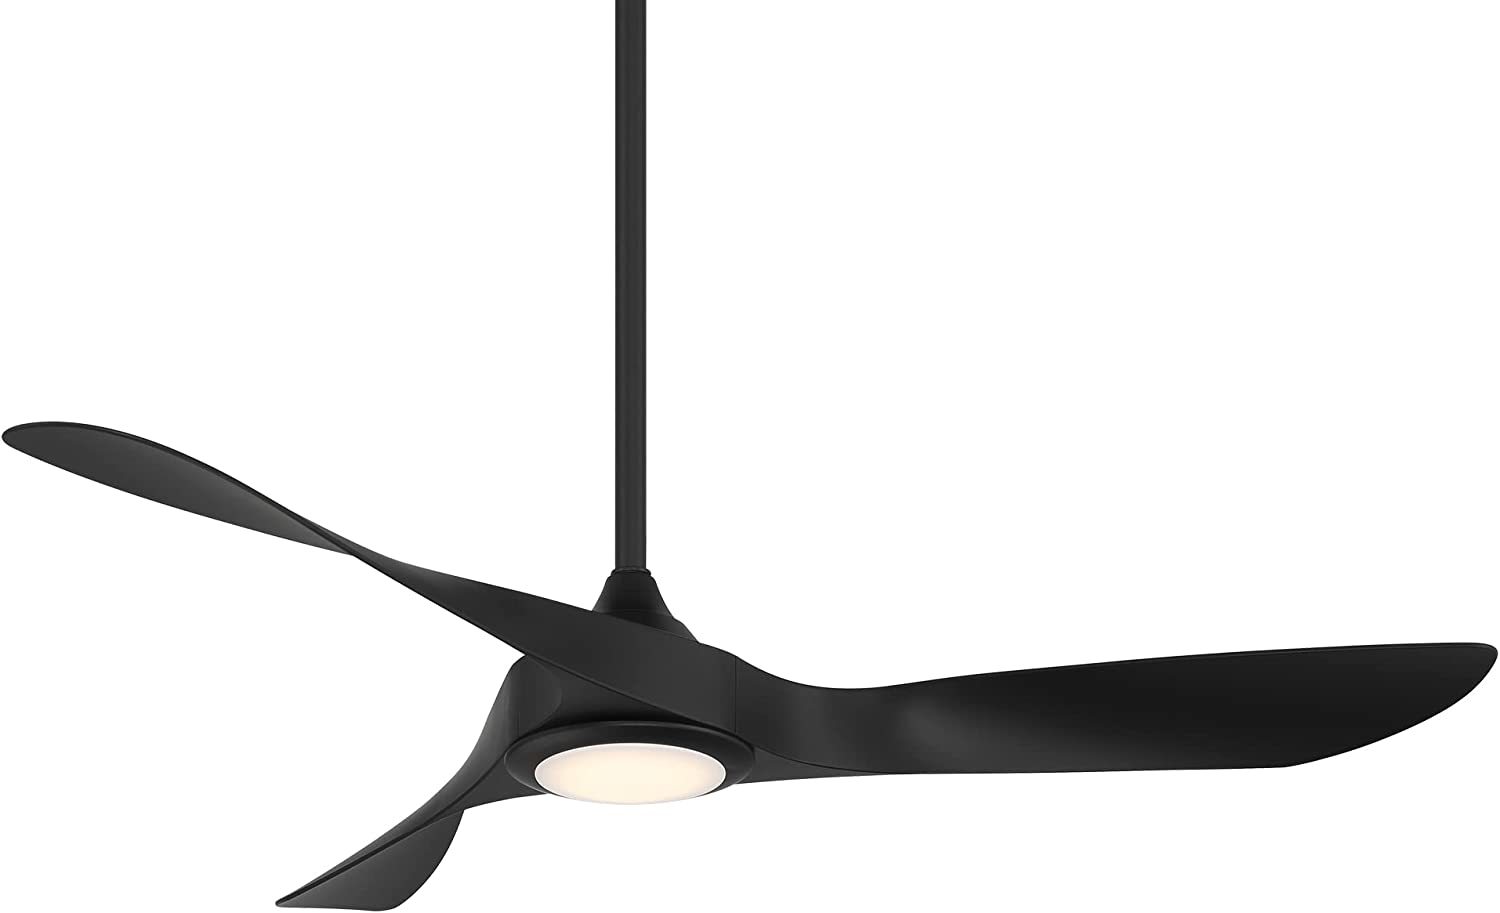 Wac Smart Fans Swirl Indoor And Outdoor 3-Blade Ceiling Fan 54" Matte Black With - $419.96